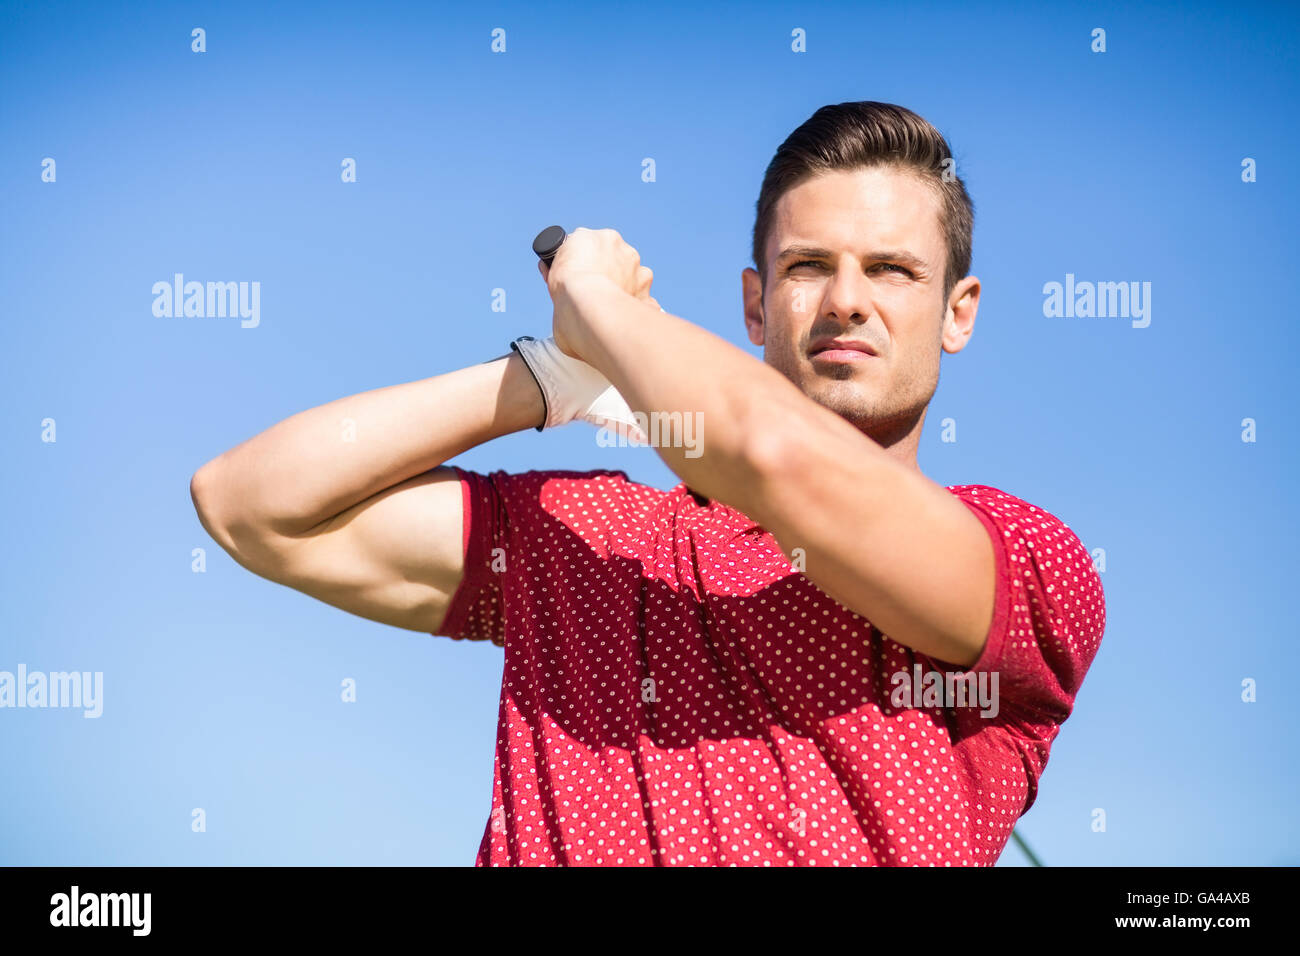 Low angle view of golfer man taking shot Stock Photo